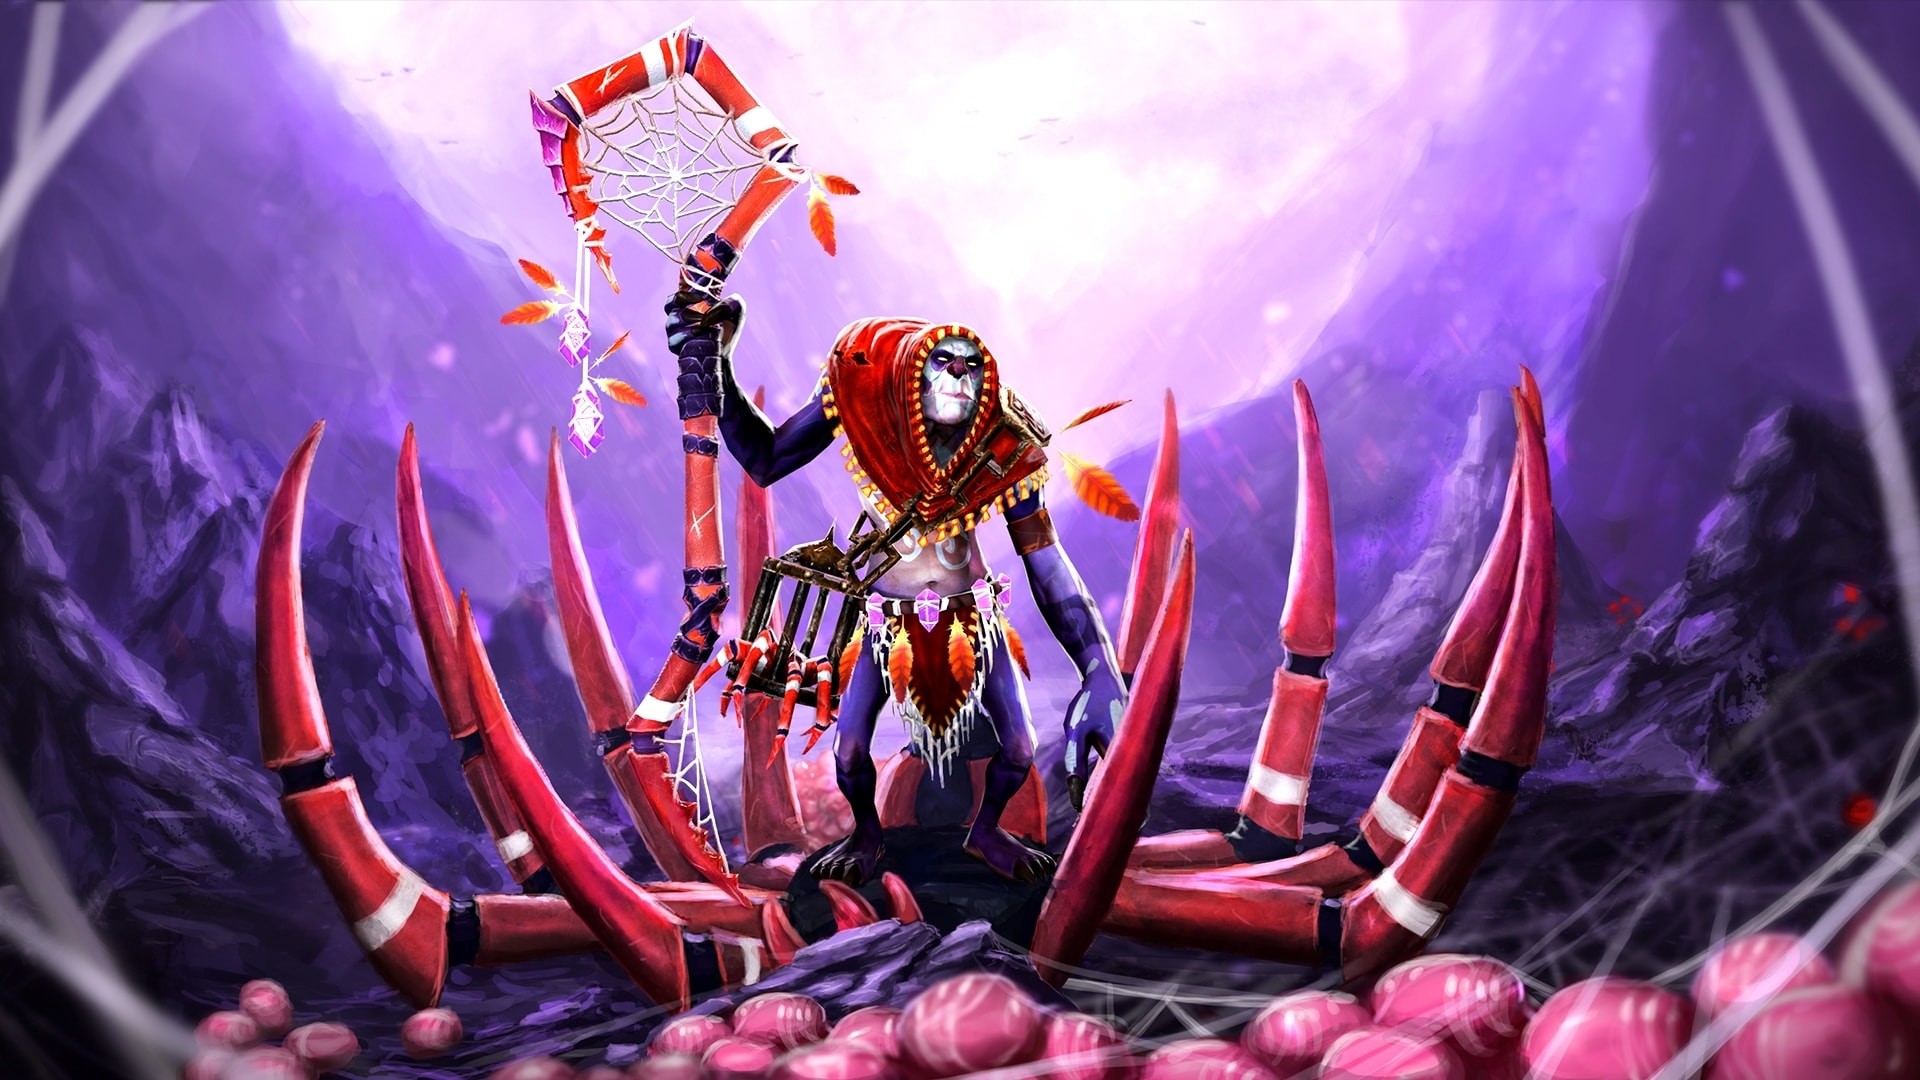 Search Results for “witch doctor dota 2 wallpaper” – Adorable Wallpapers